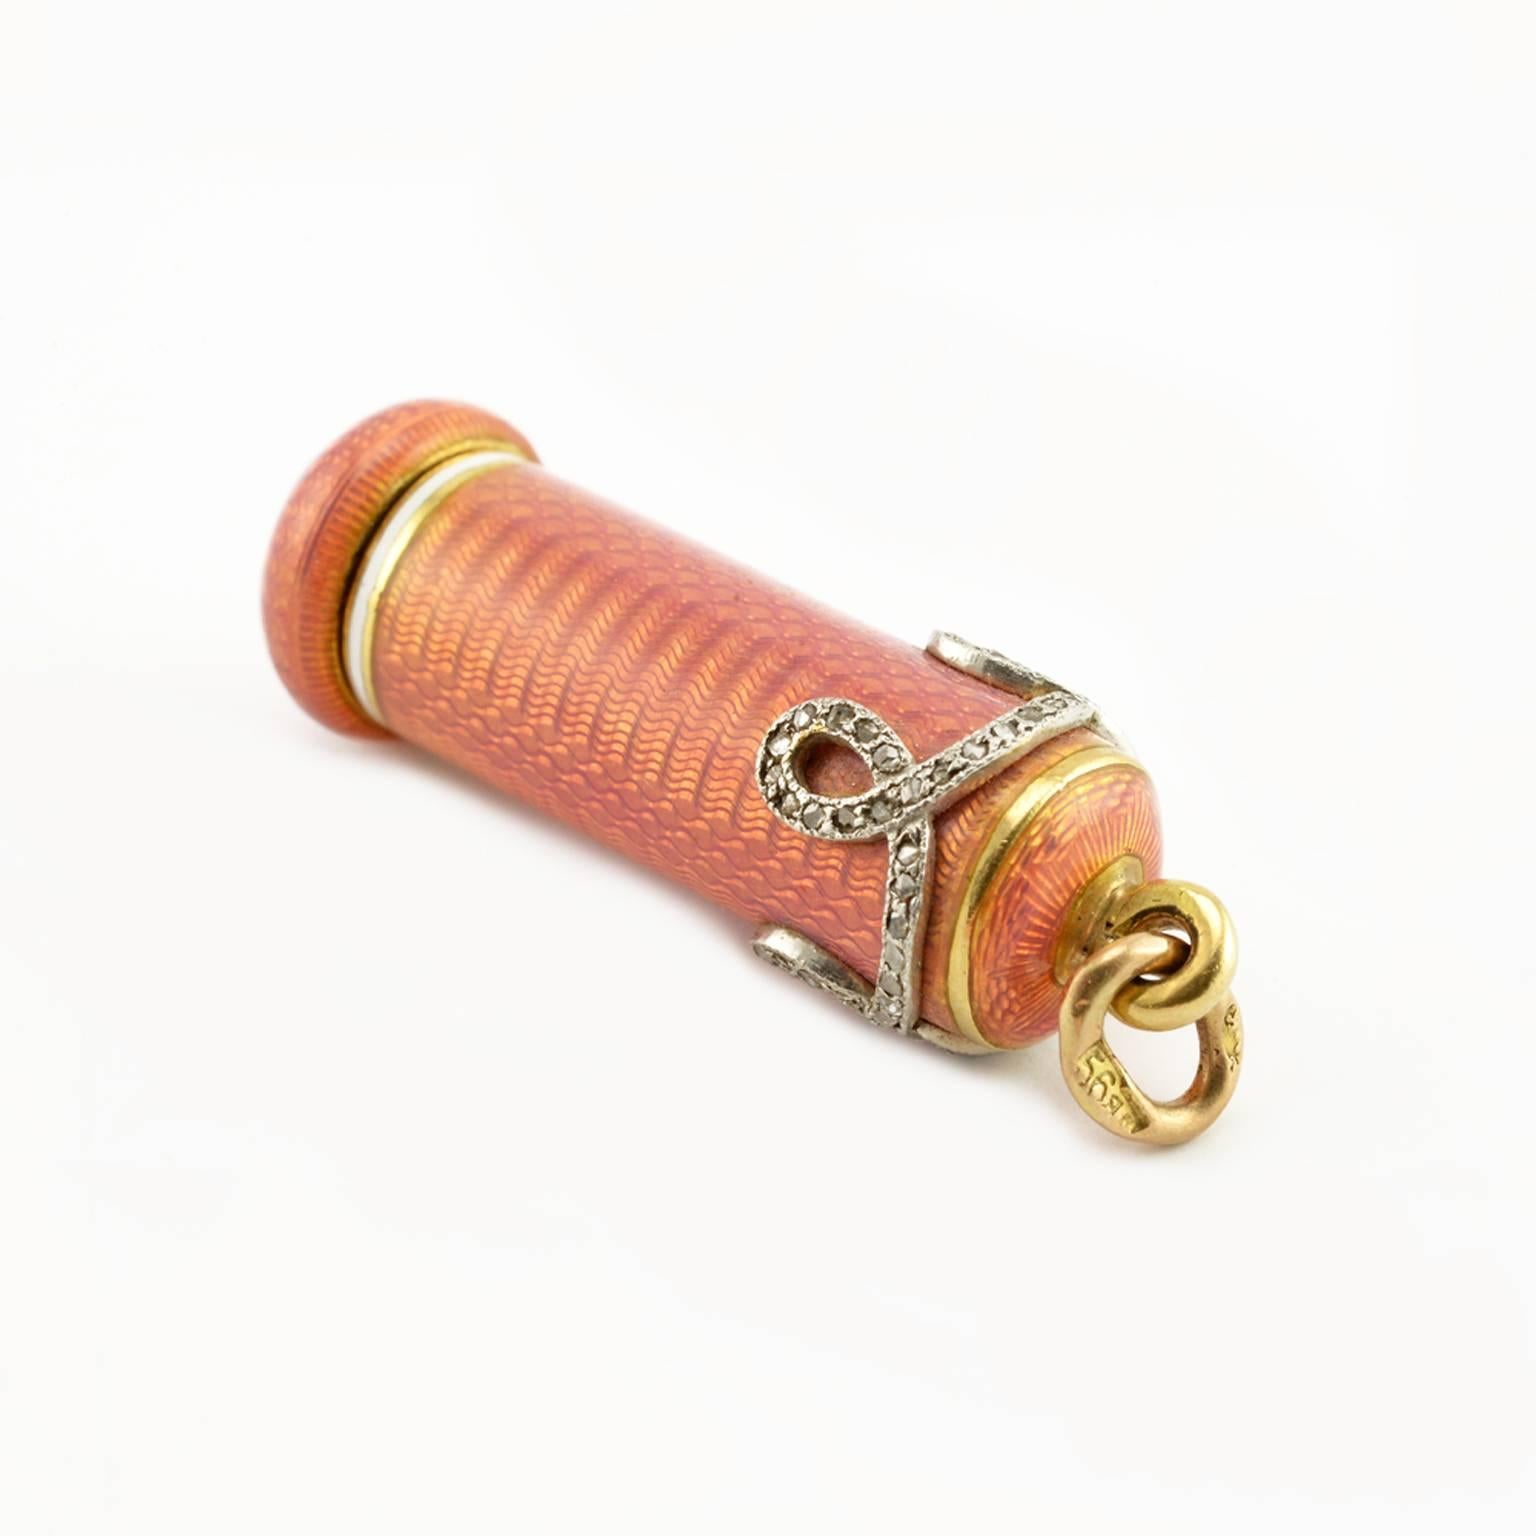 A Russian Imperial antique diamond-set gold and guilloché enamel retractable pencil, St. Petersburg, 1899-1904. The cylindrical body enameled rose pink over a wavy, engine-turned ground, the top with a band of diamond-set scrolls, a collar of opaque